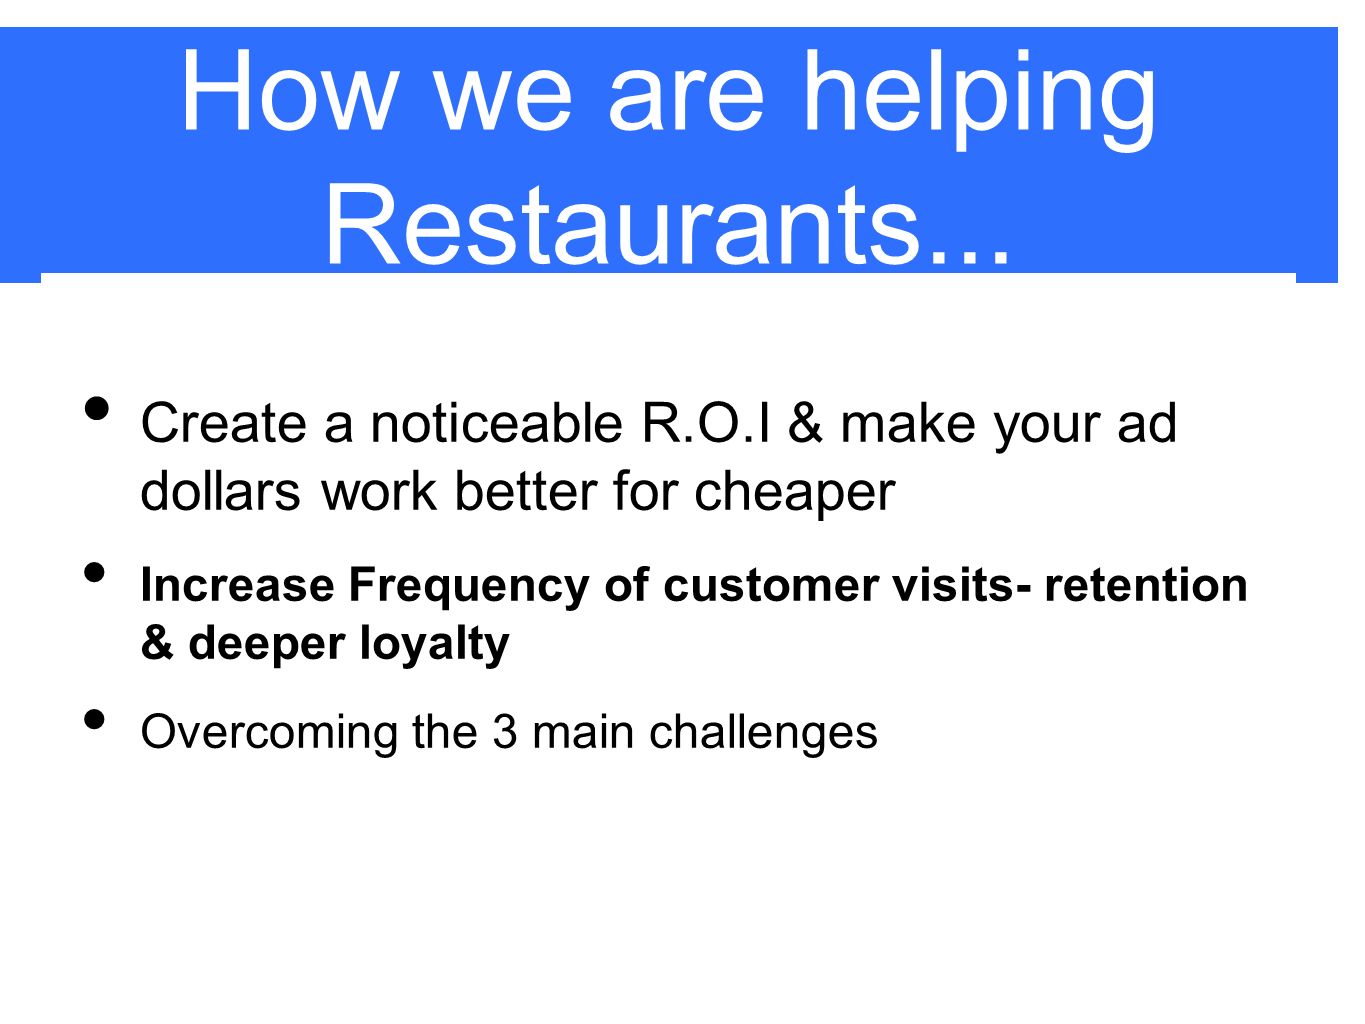 How we are helping Restaurants...